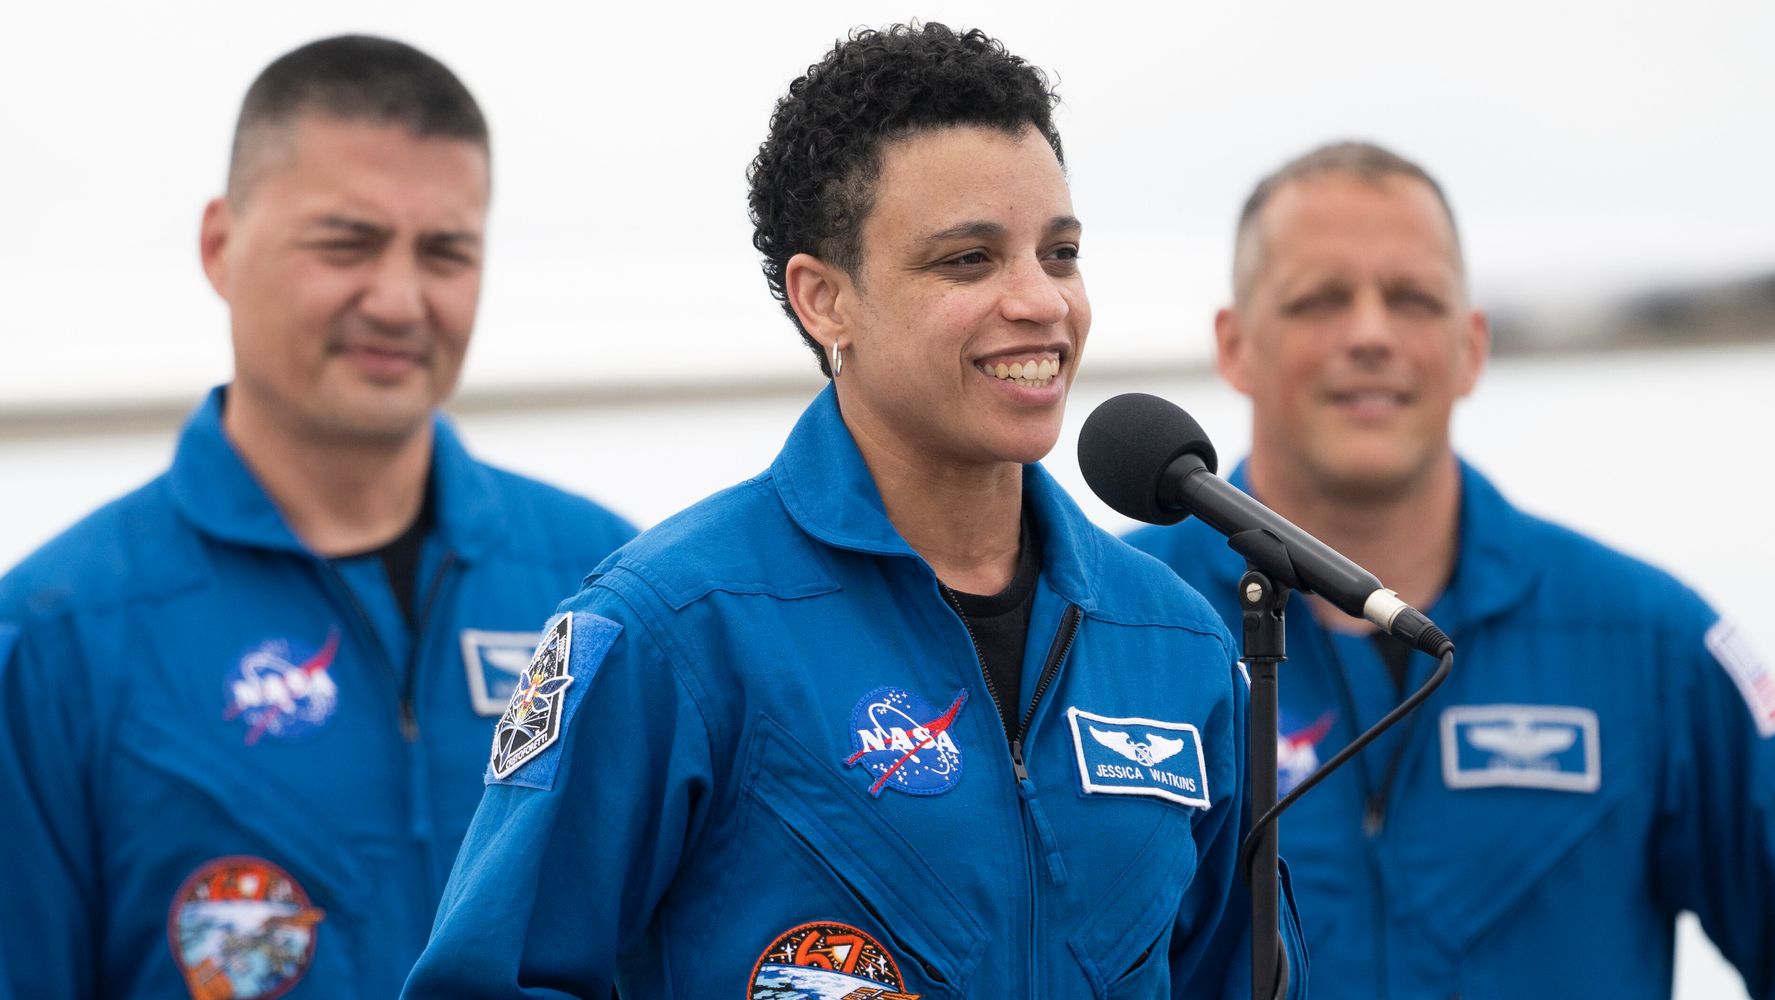 NASA Astronaut Jessica Watkins To Become First Black Woman To Spend Months In Space